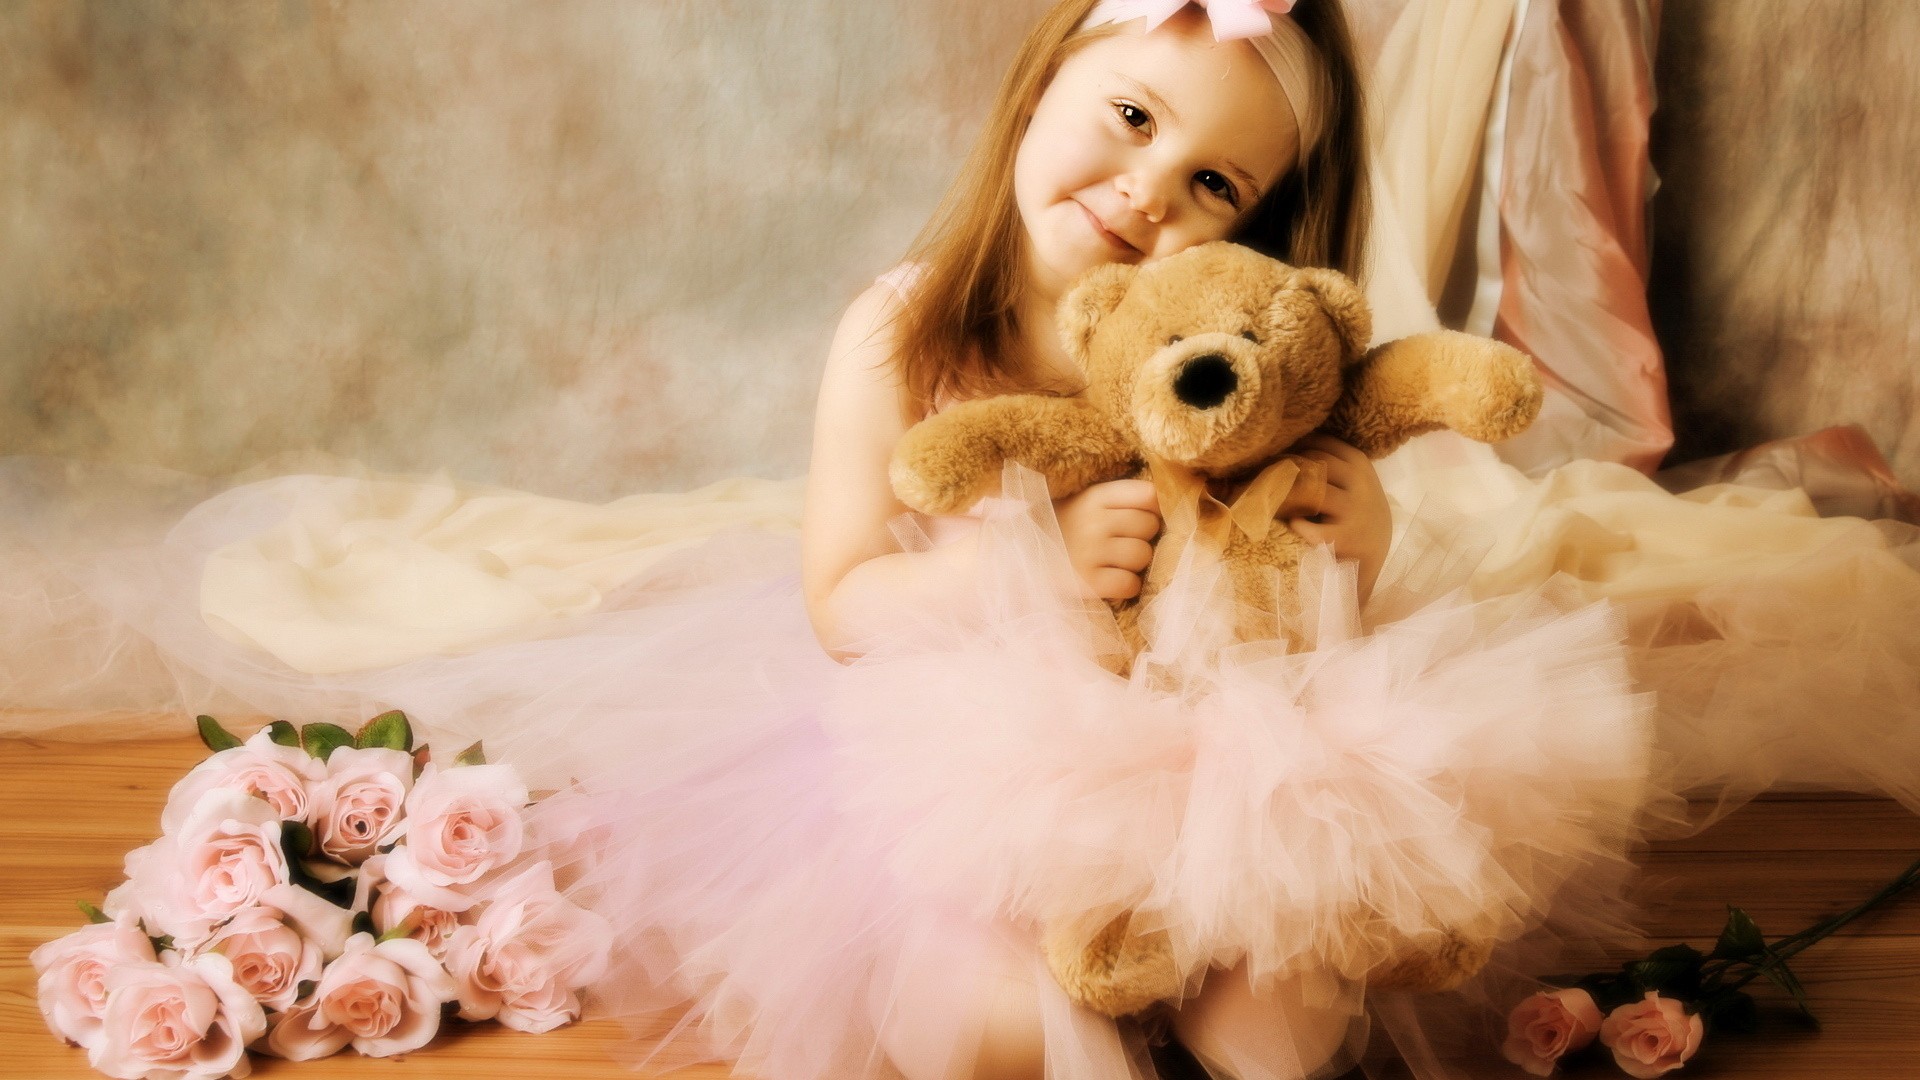 68 Cute Wallpapers For Girls Download Free Stunning